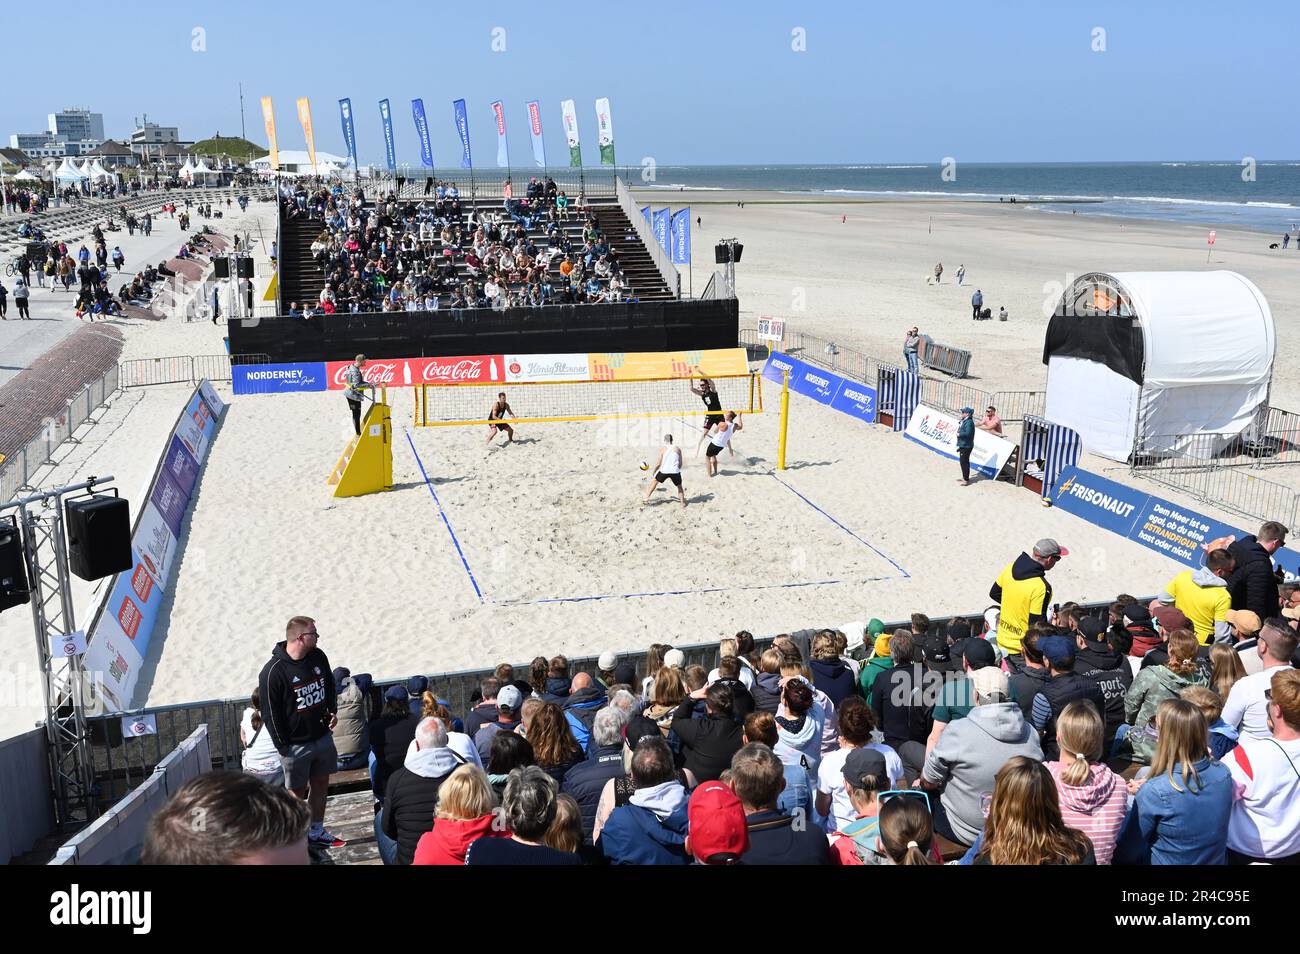 27 May 2023, Lower Saxony, Norderney: The team of ' Hauptstadt Beacher e.V/ VC Olympia Berlin ' with Eric Stadie and Niklas Rudolf ( black jerseys ) playing against the team Bremen 1860. From 26 to 28 May the 'White Sands Festival' will take place on Norderney. Excursion weather in large parts of Germany: Over the Whitsun weekend into the coming week, partly summery temperatures above 25 degrees are expected. Almost everywhere it will remain mostly dry in the coming days with scattered clouds, as predicted by the German Weather Service. In the Alps, however, there could also be thunderstorms. Stock Photo